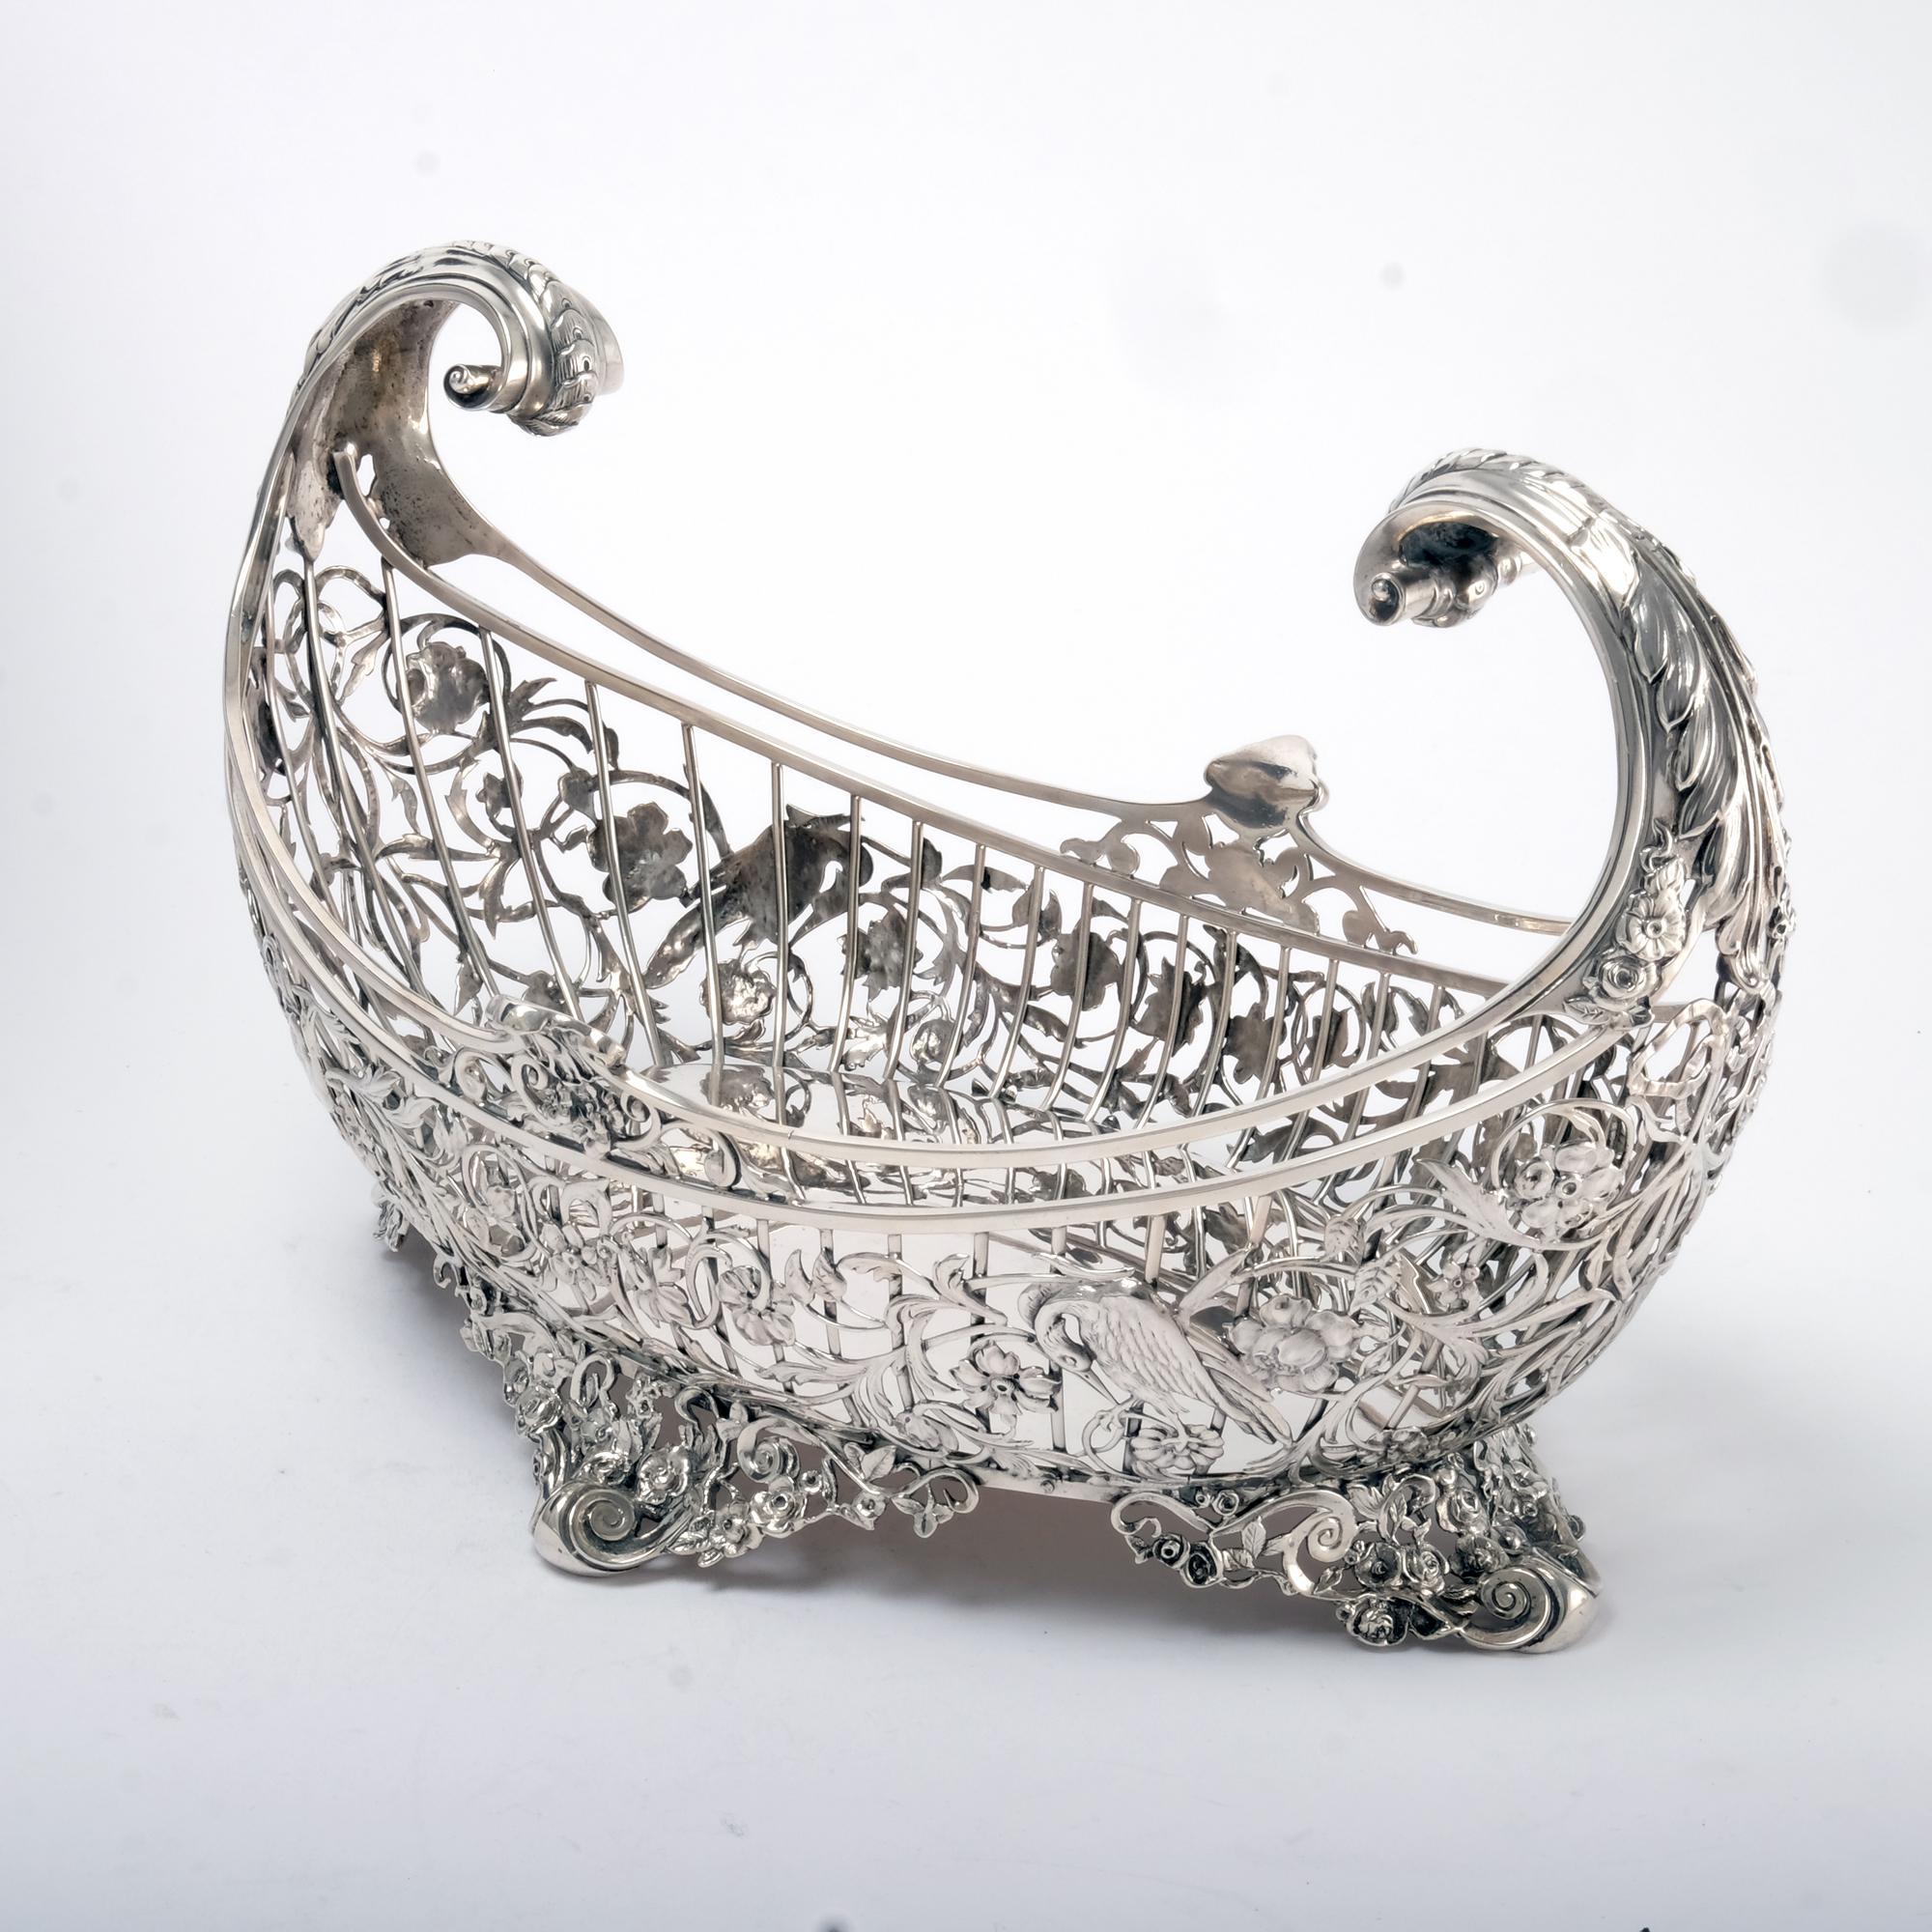 This wonderful and fine-quality Edwardian silver fruit basket, is oval in form with flying leaf-cap scroll handles. The beautiful wirework sides are abundantly adorned with cast bird, leaf and flower decorations. It is a particularly heavy example